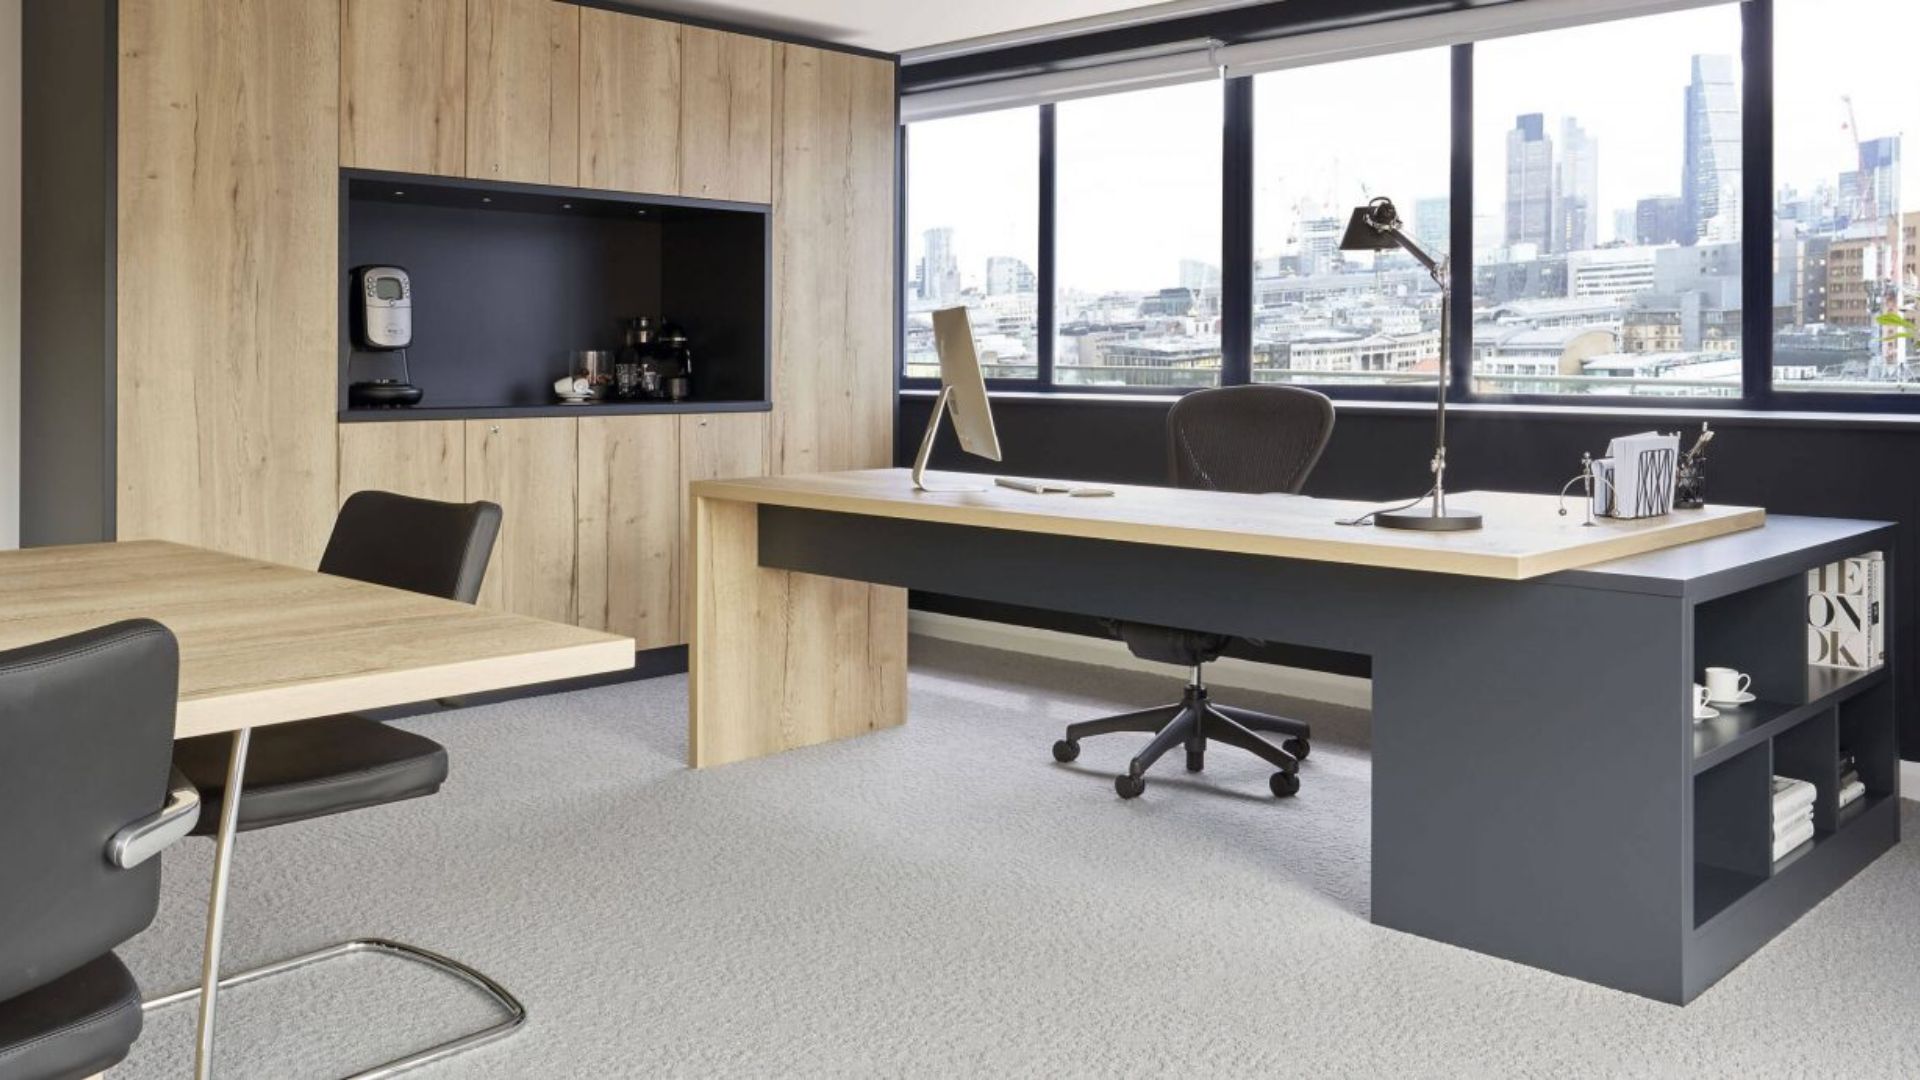 Choosing the Best Materials for Office Furniture